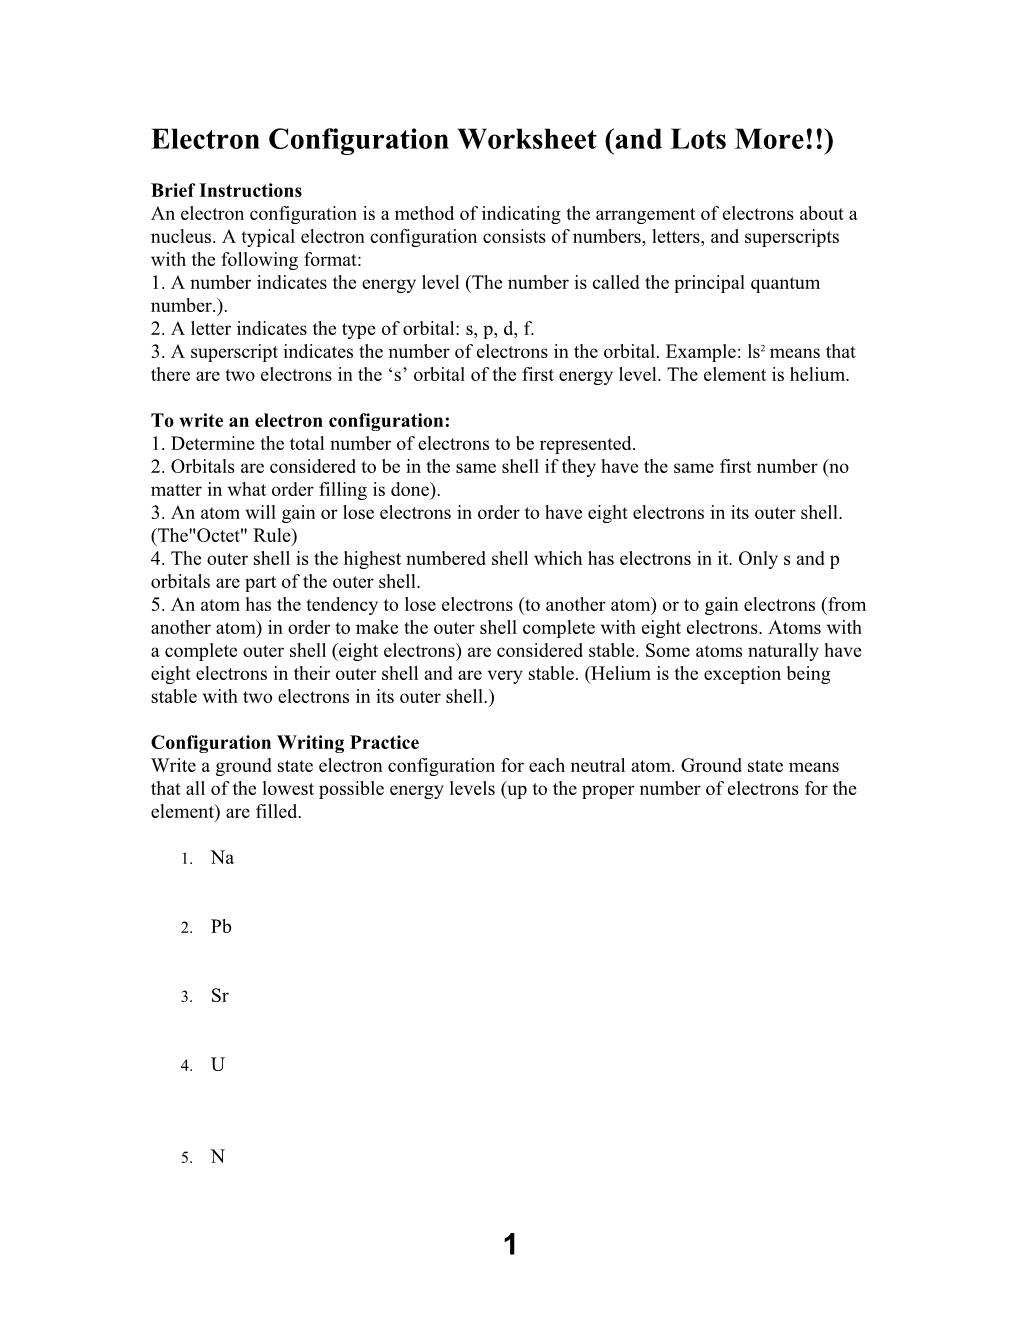 Electron Configuration Worksheet (And Lots More